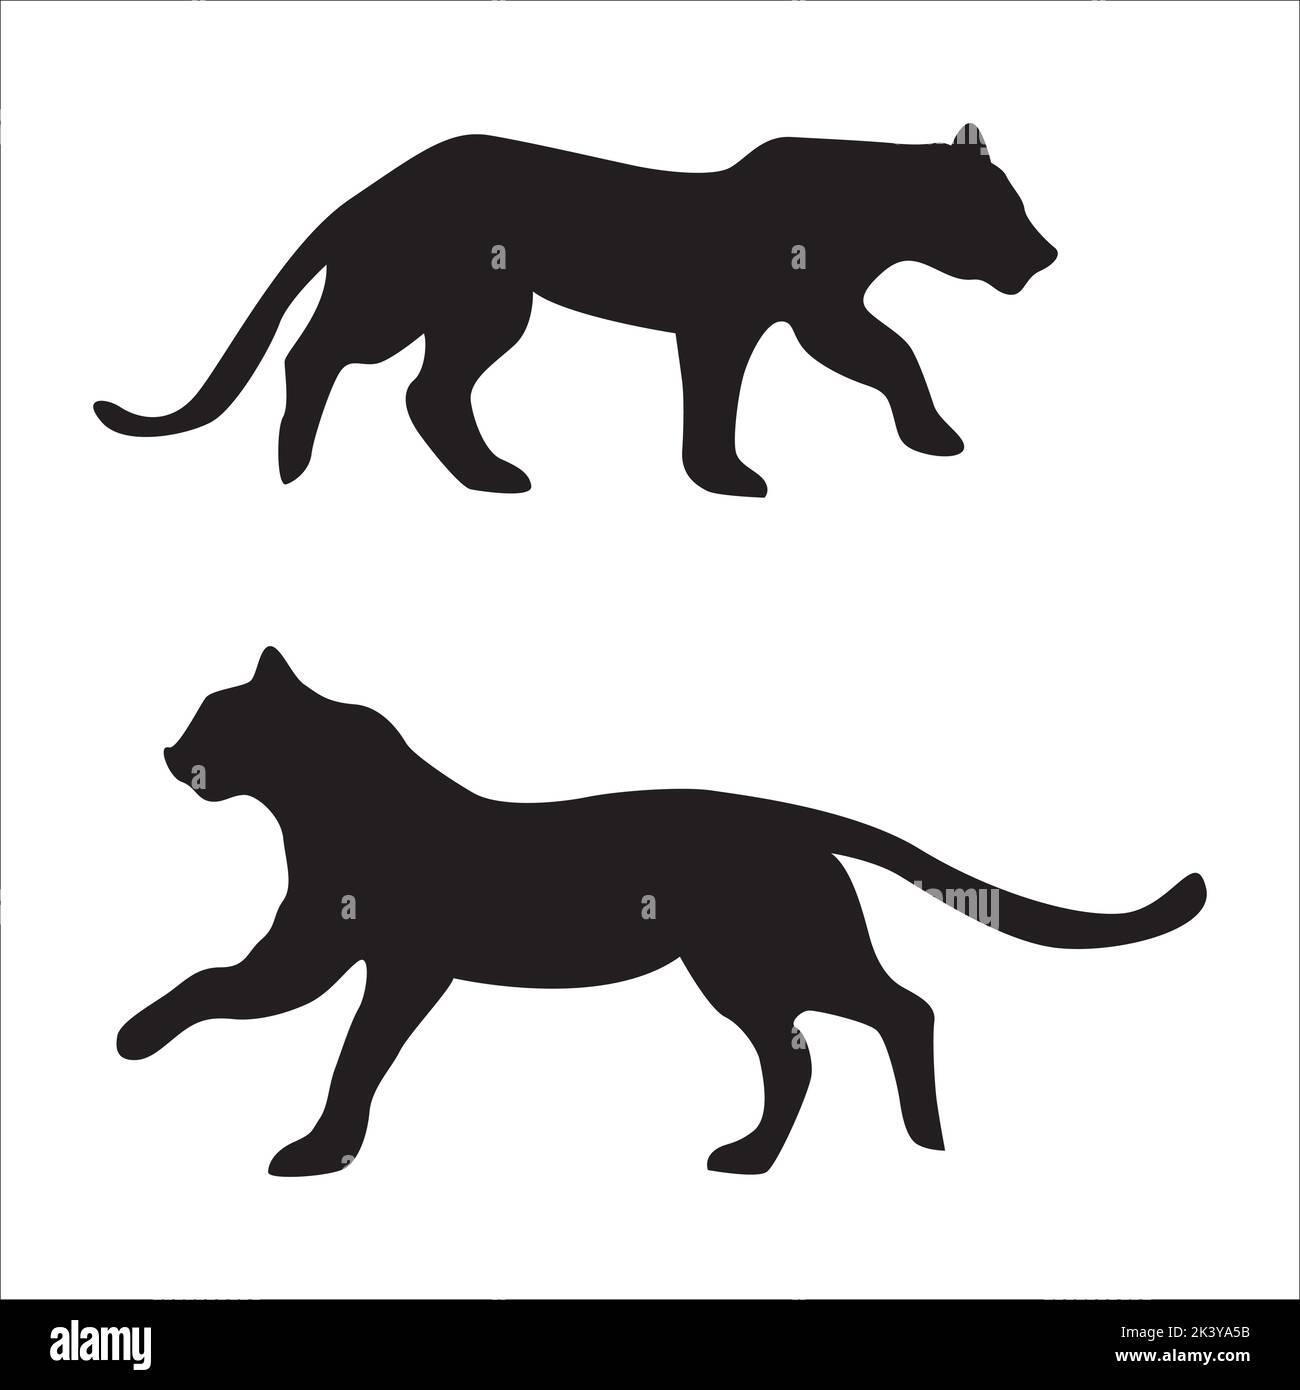 Vector Set Of Tigers Silhouettes Illustration Isolated On White Background Stock Vector